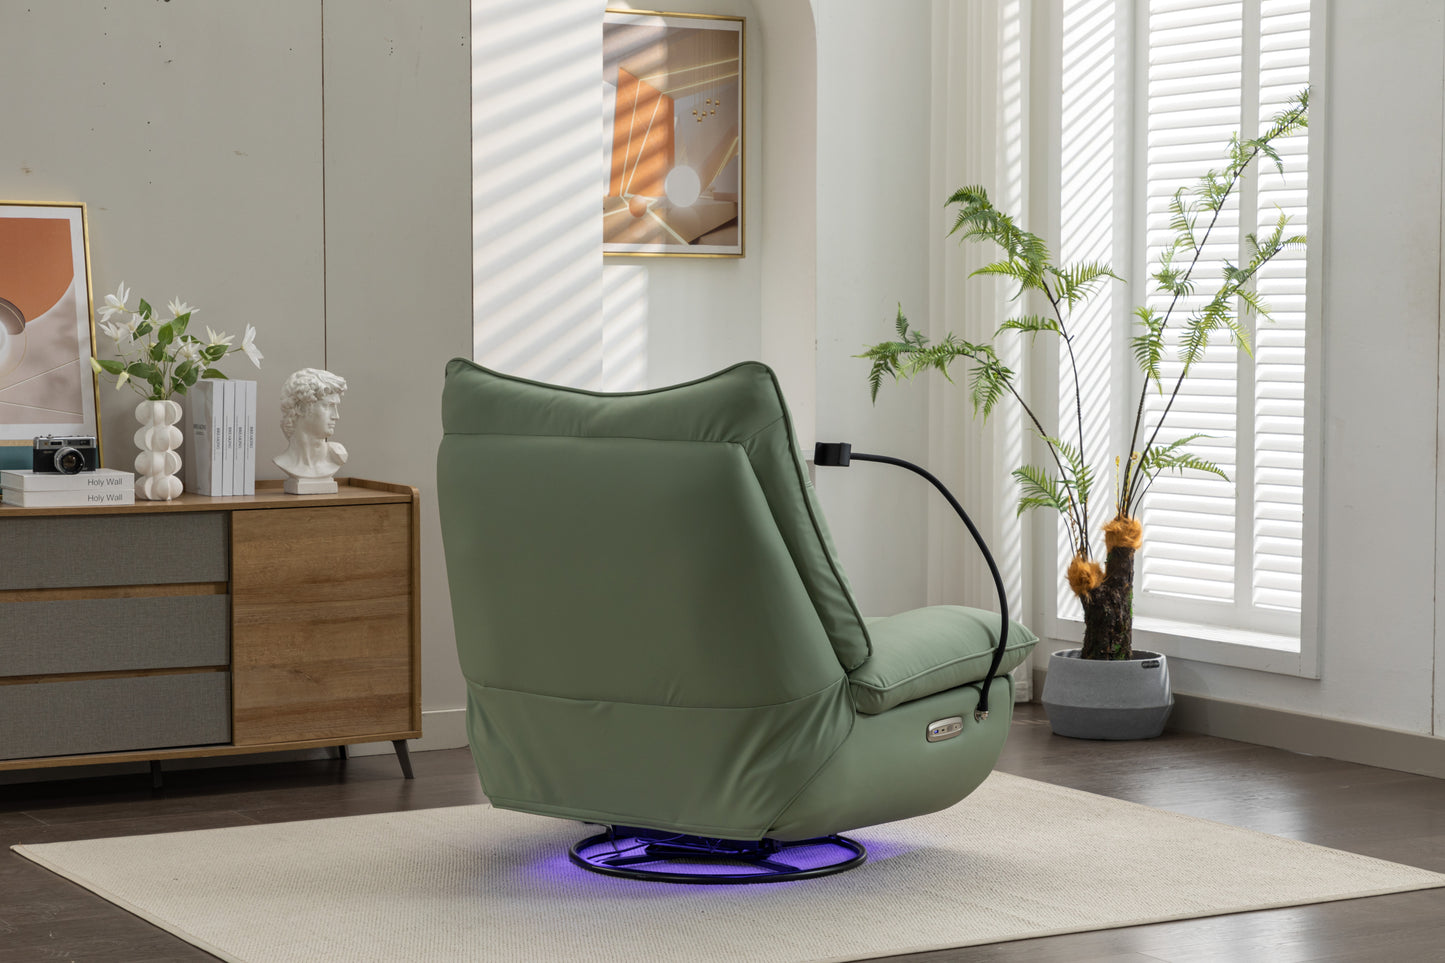 Four Modes Of  Intelligent Voice Control,Atmosphere Lamp,Bluetooth Music Player,USB Ports,Back And Forth Swing, Hidden Arm Storage and Mobile Phone Holder.270 Degree Swivel Power Recliner